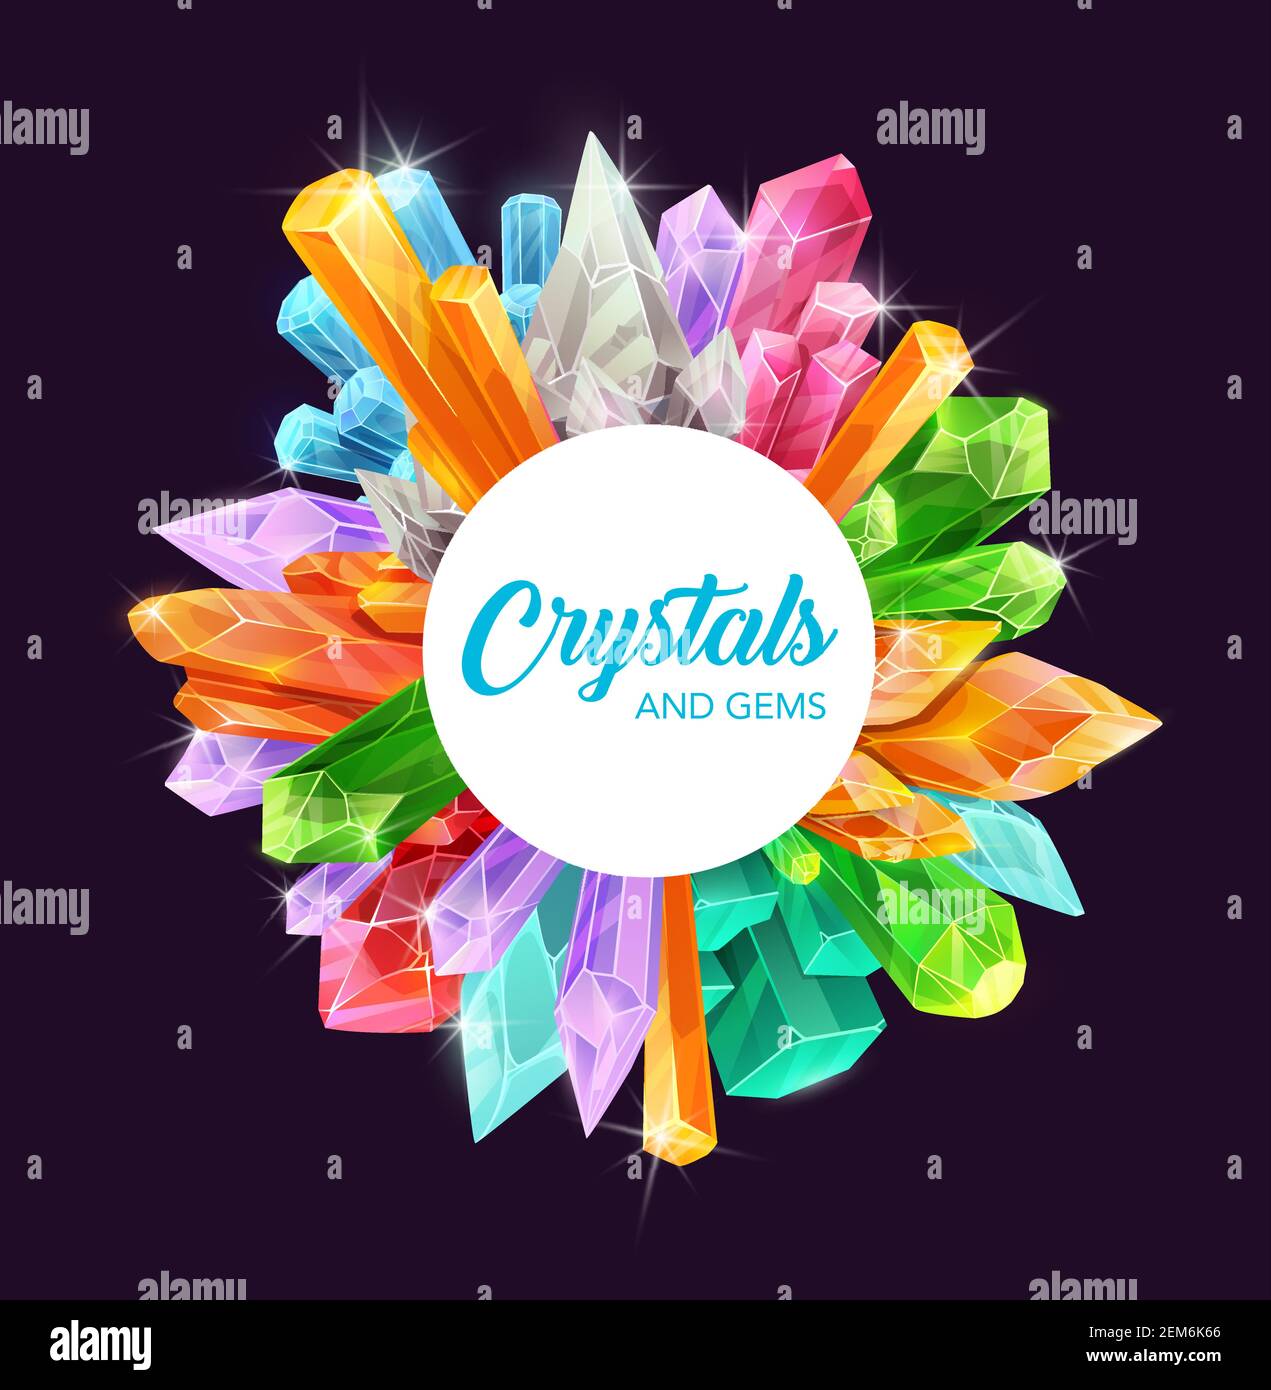 Crystals and gems vector frame of precious gemstones and mineral rocks, magic stones and jewels design. Pink quartz, blue sapphire and amethyst, diamo Stock Vector